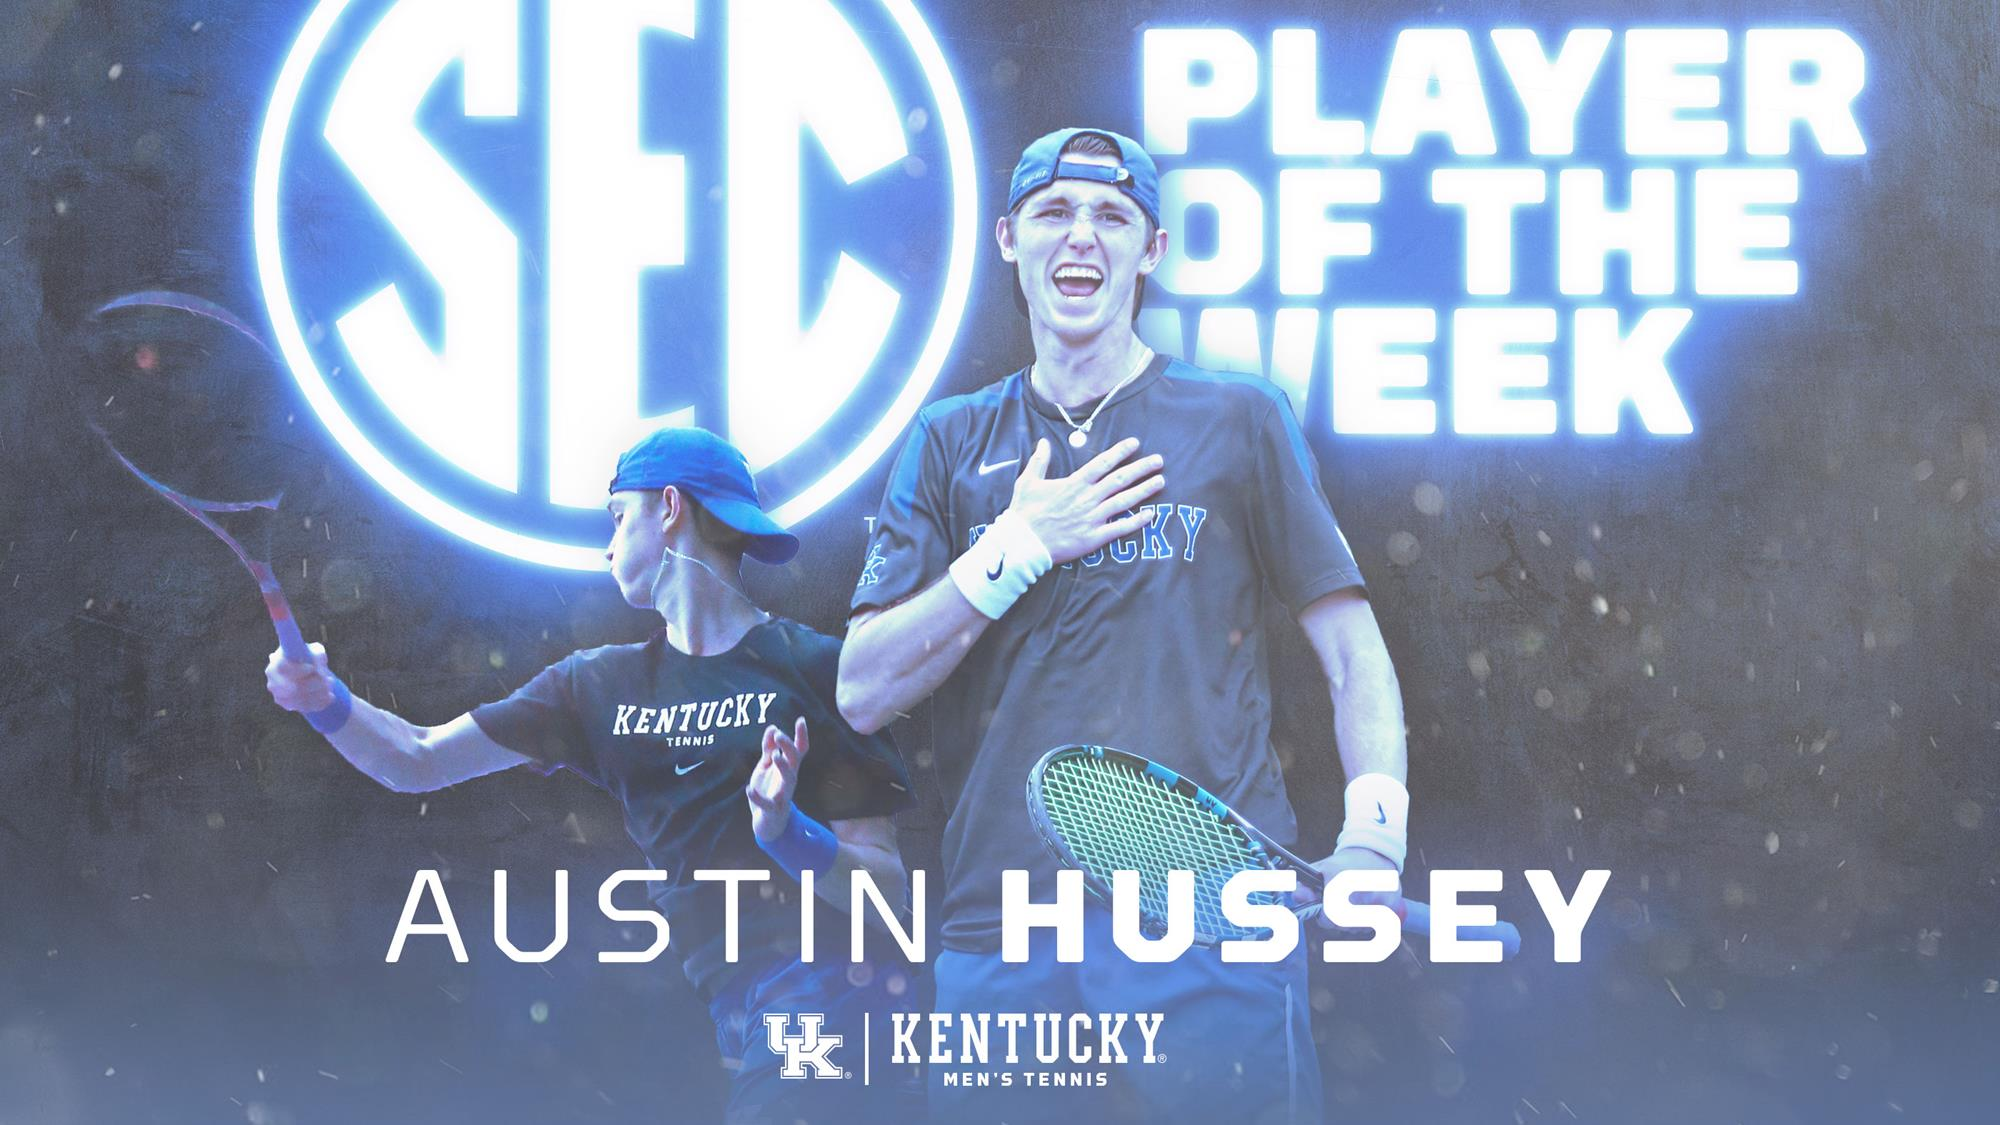 Austin Hussey Named SEC Player of the Week